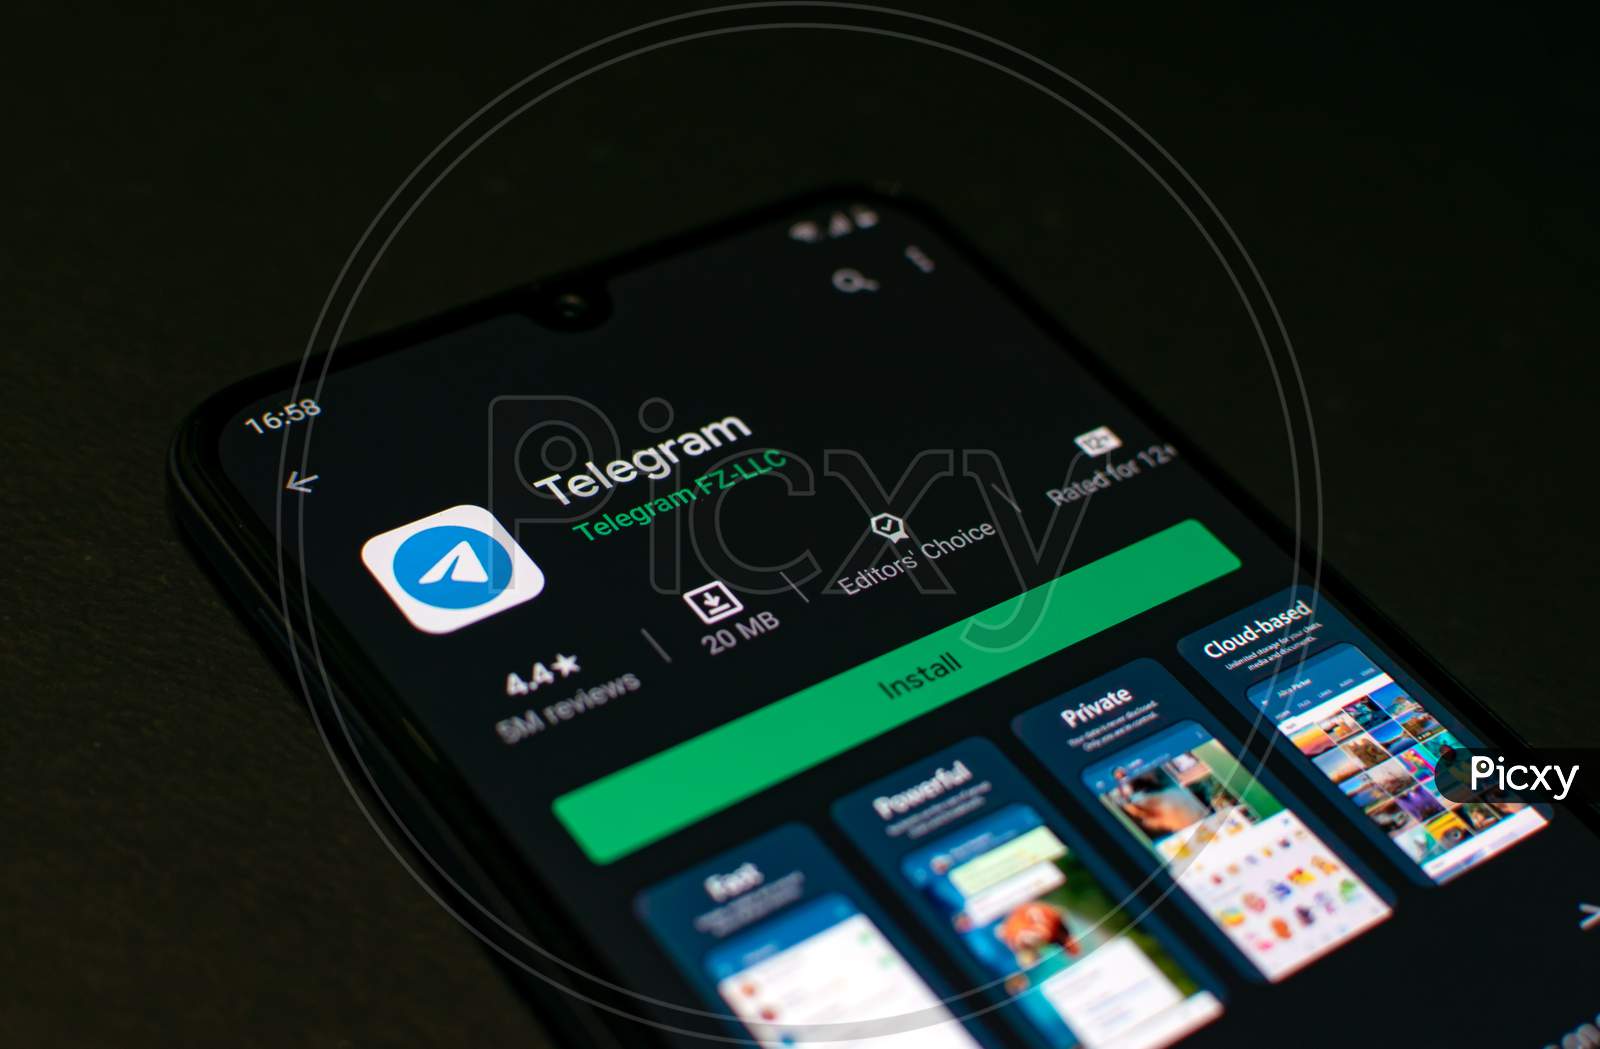 Telegram application on Smartphone screen. This Chating app is a freeware in Android Playstore developed by Telegram FZ-LLC